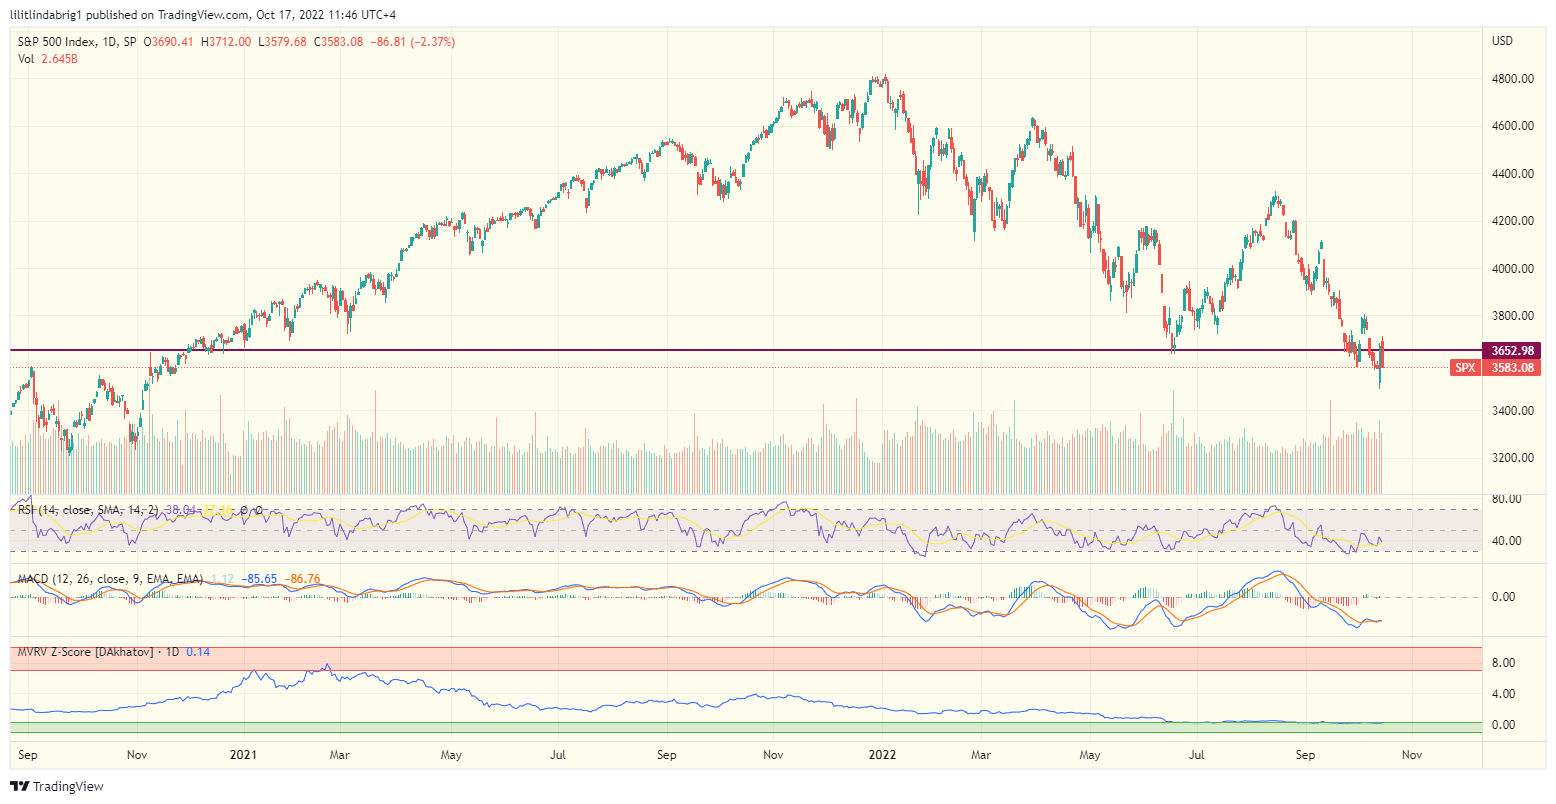 stock market index S&P 500 index (SPX) plummeted over 27% year-to-date. 